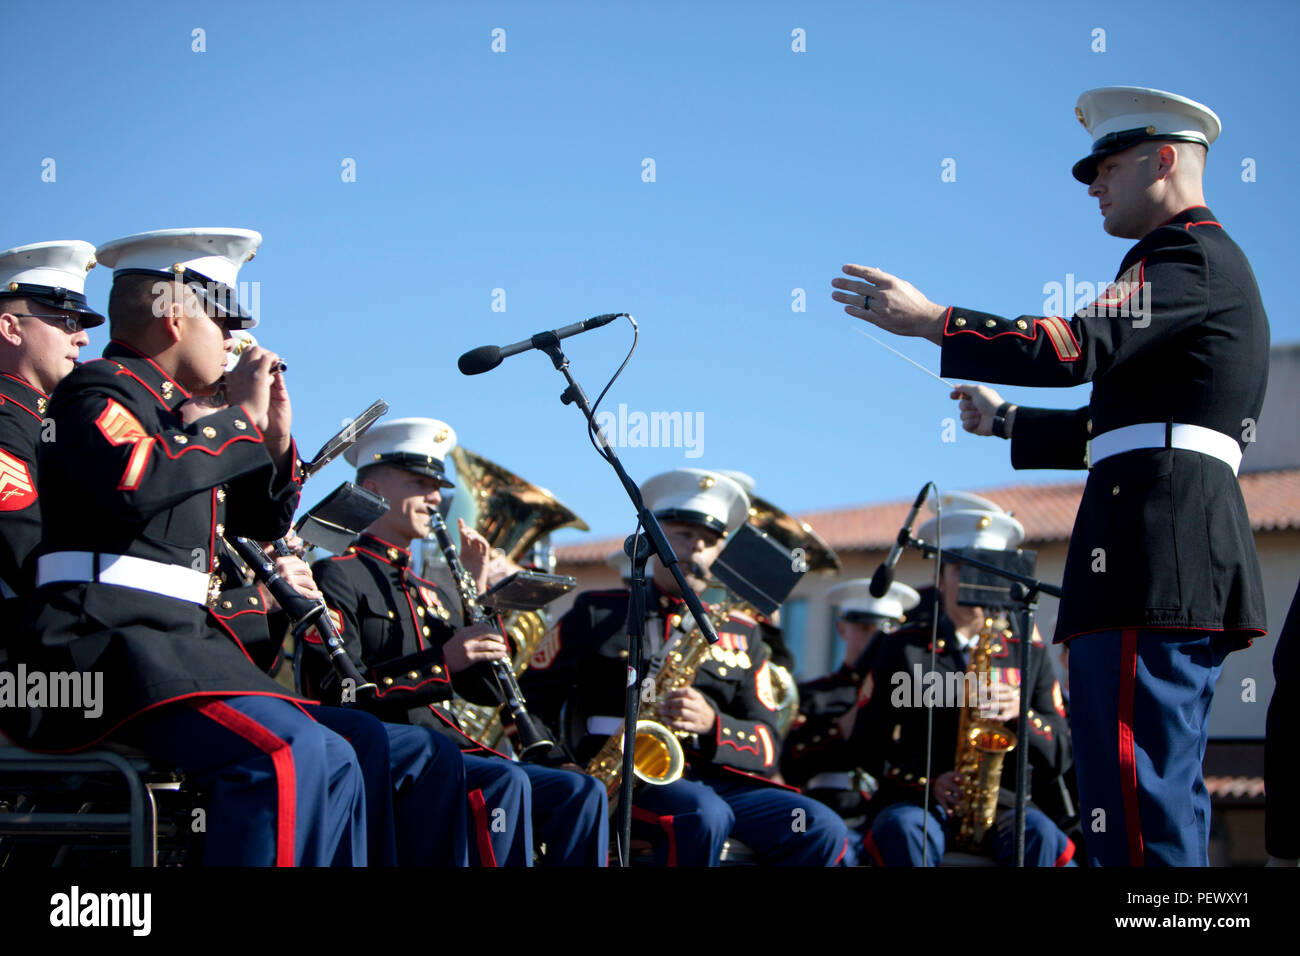 U.S. Marine Corps Staff Sgt. Benjamin Hallquist with 1st Marine Division Band conducts the band before the start of the President Ronald Reagan wreath laying ceremony, at the Ronald Reagan Presidential Foundation and Library, Simi Valley, Calif., Feb, 6 2016. The purpose of this ceremony is to honor the 105th Anniversary of his birth and pay tribute to his distinguished service to a grateful nation. (U.S. Marine Corps photo by Cpl. Brian Bekkala/MCIWEST-MCB CamPen Combat Camera/Released) Stock Photo